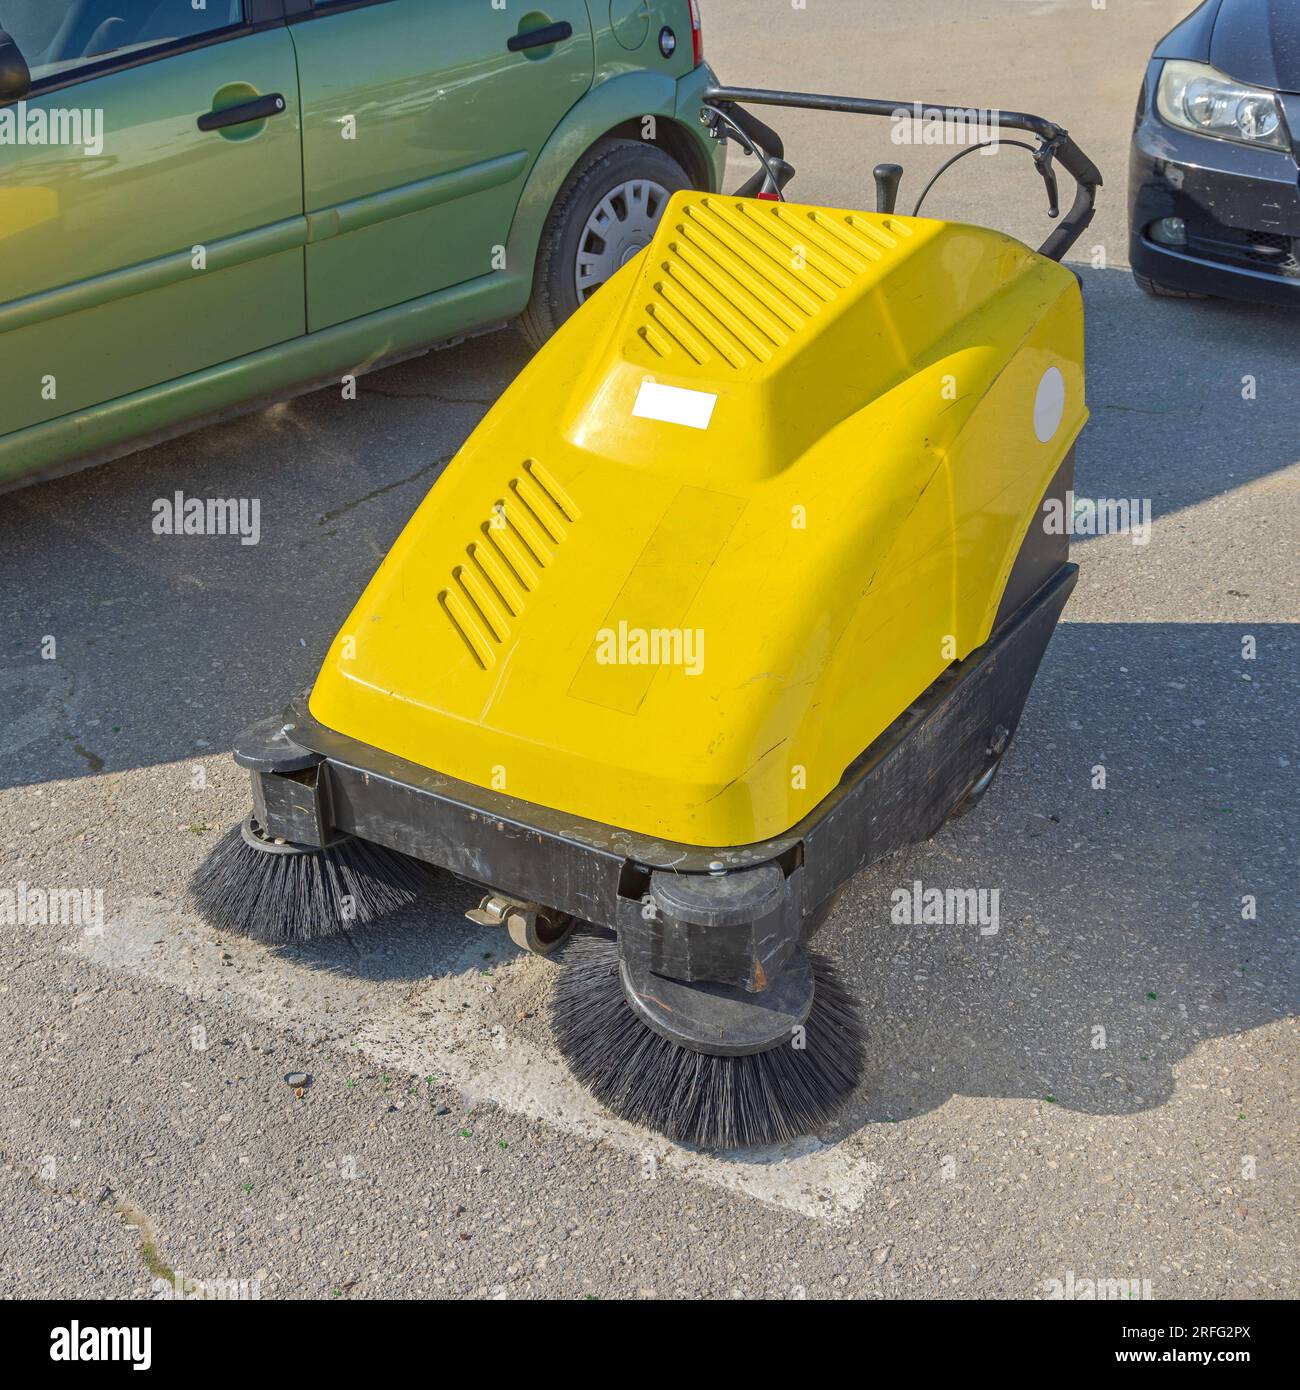 Hand Controlled Big Sweeper Machine Cleaning Equipment Stock Photo